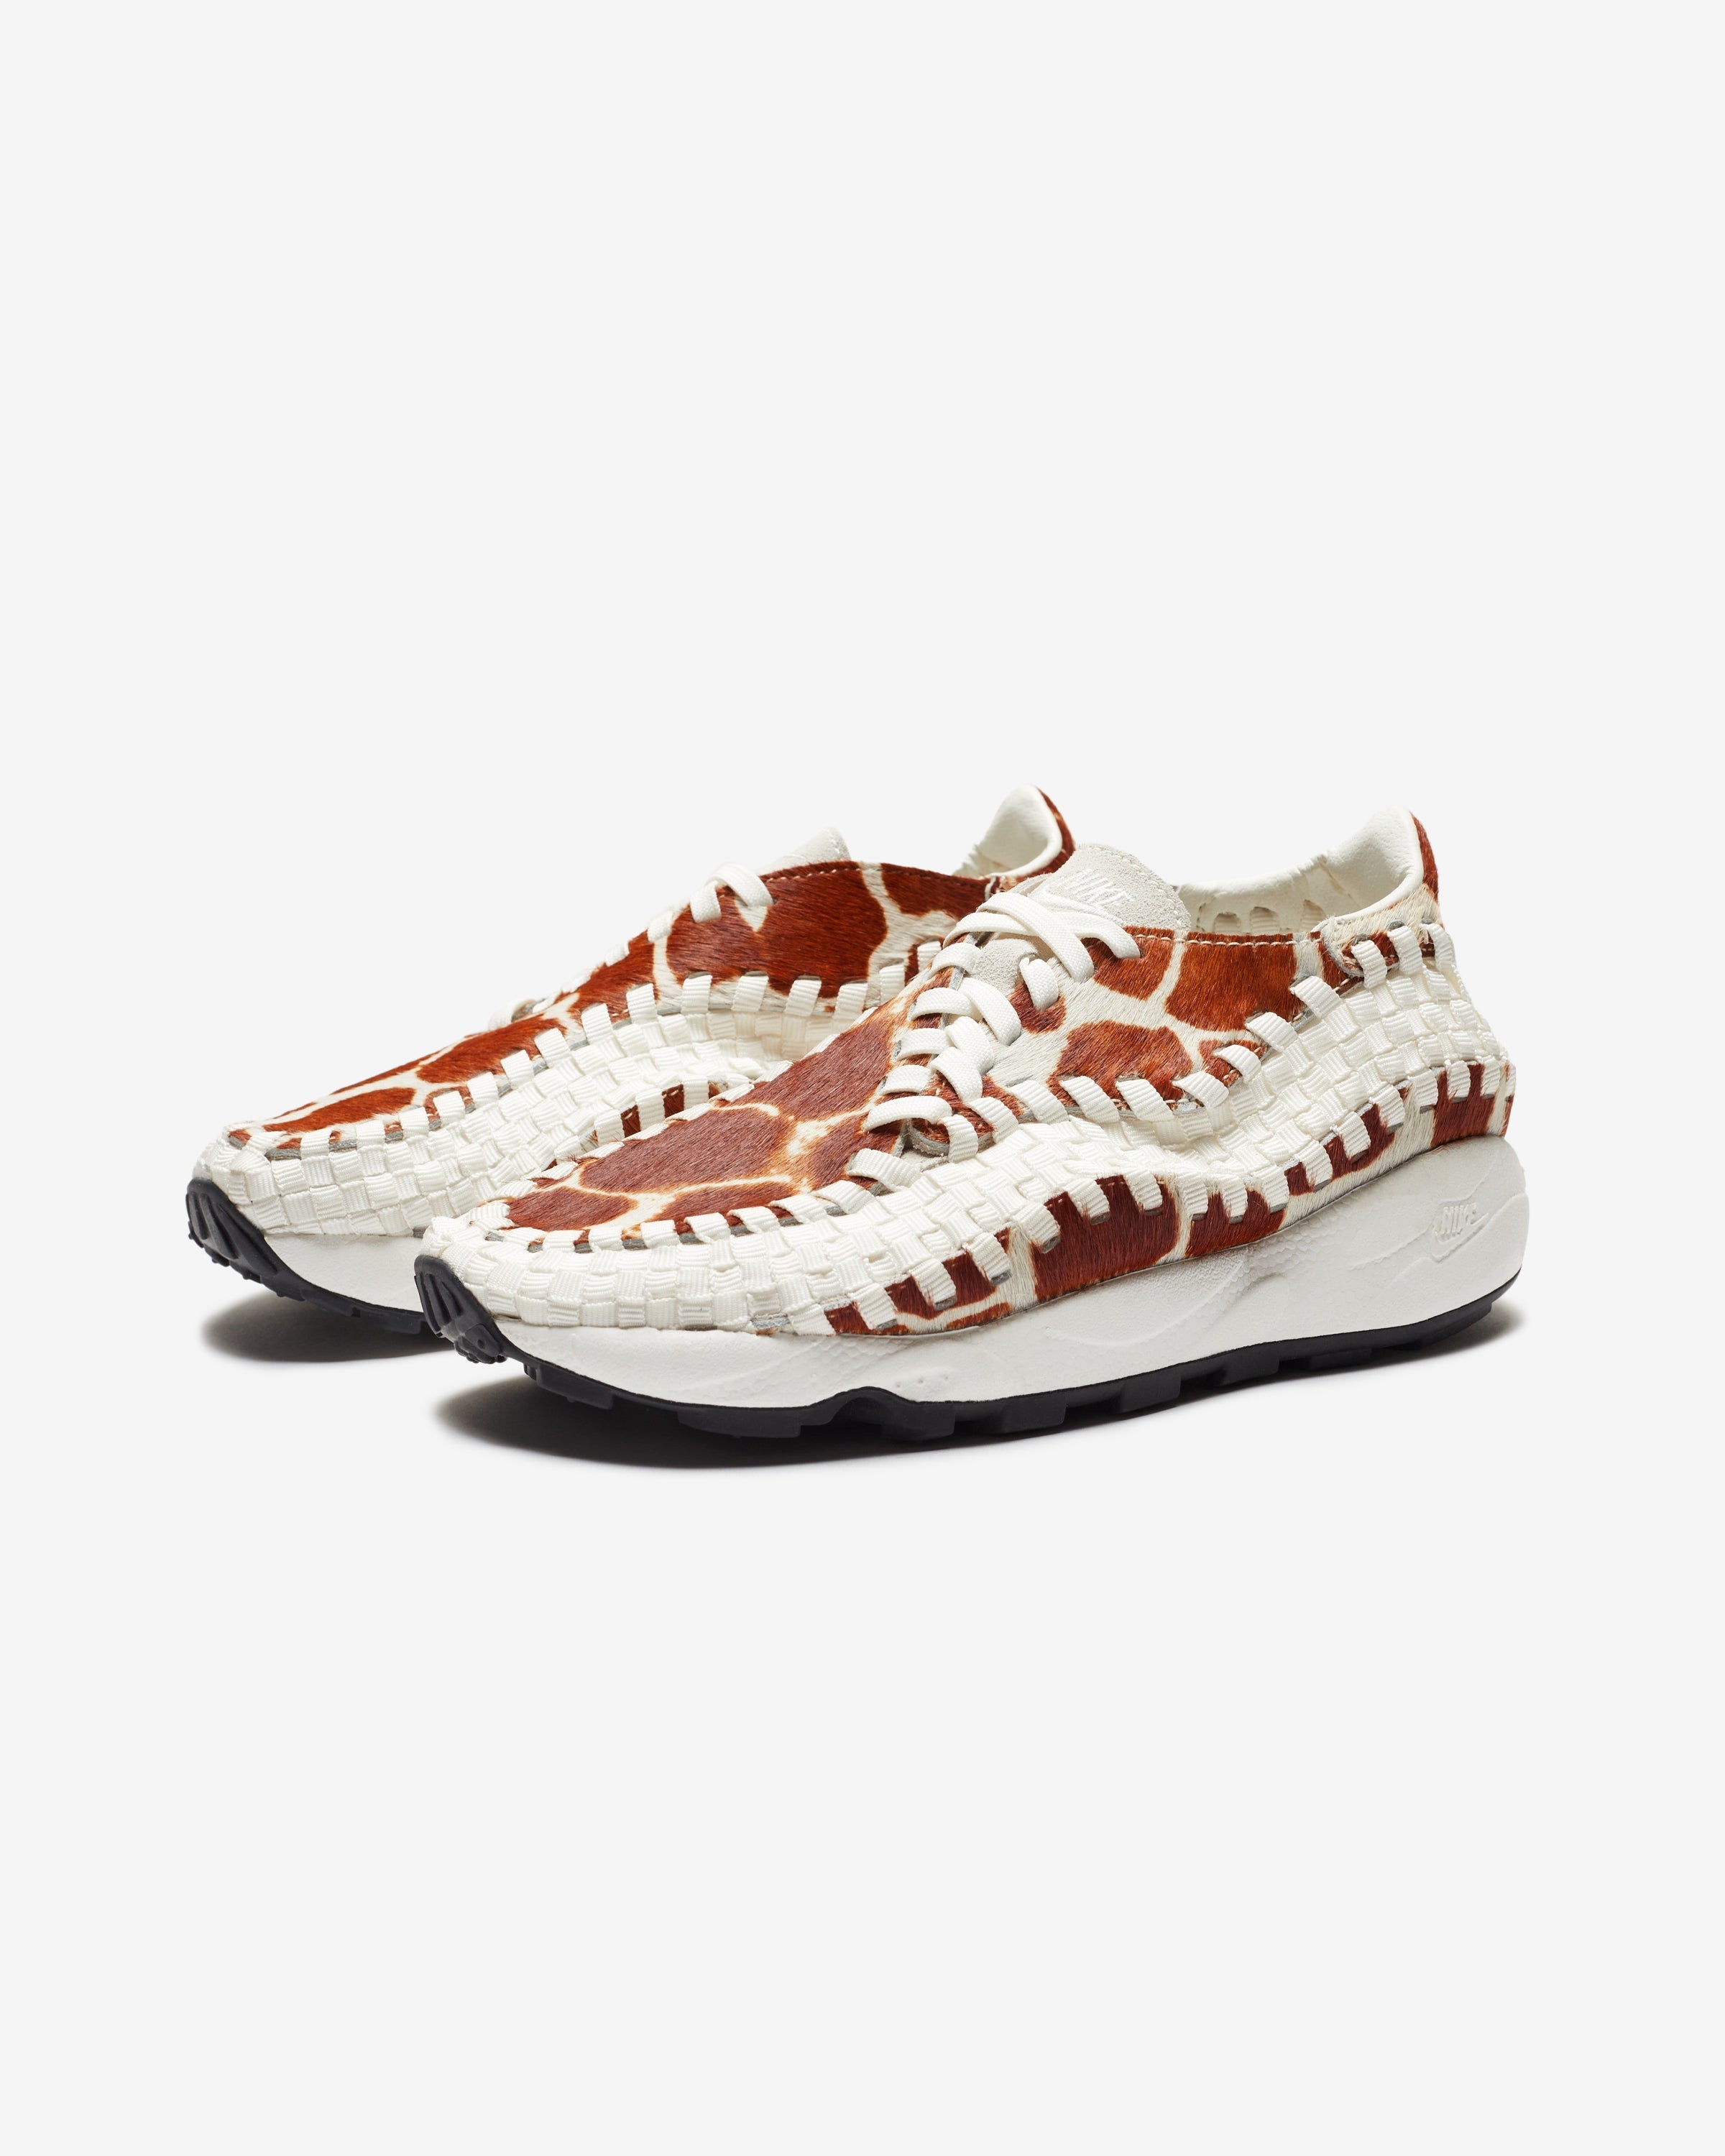 NIKE WOMEN'S AIR FOOTSCAPE WOVEN - SAIL/ BLACK – Undefeated